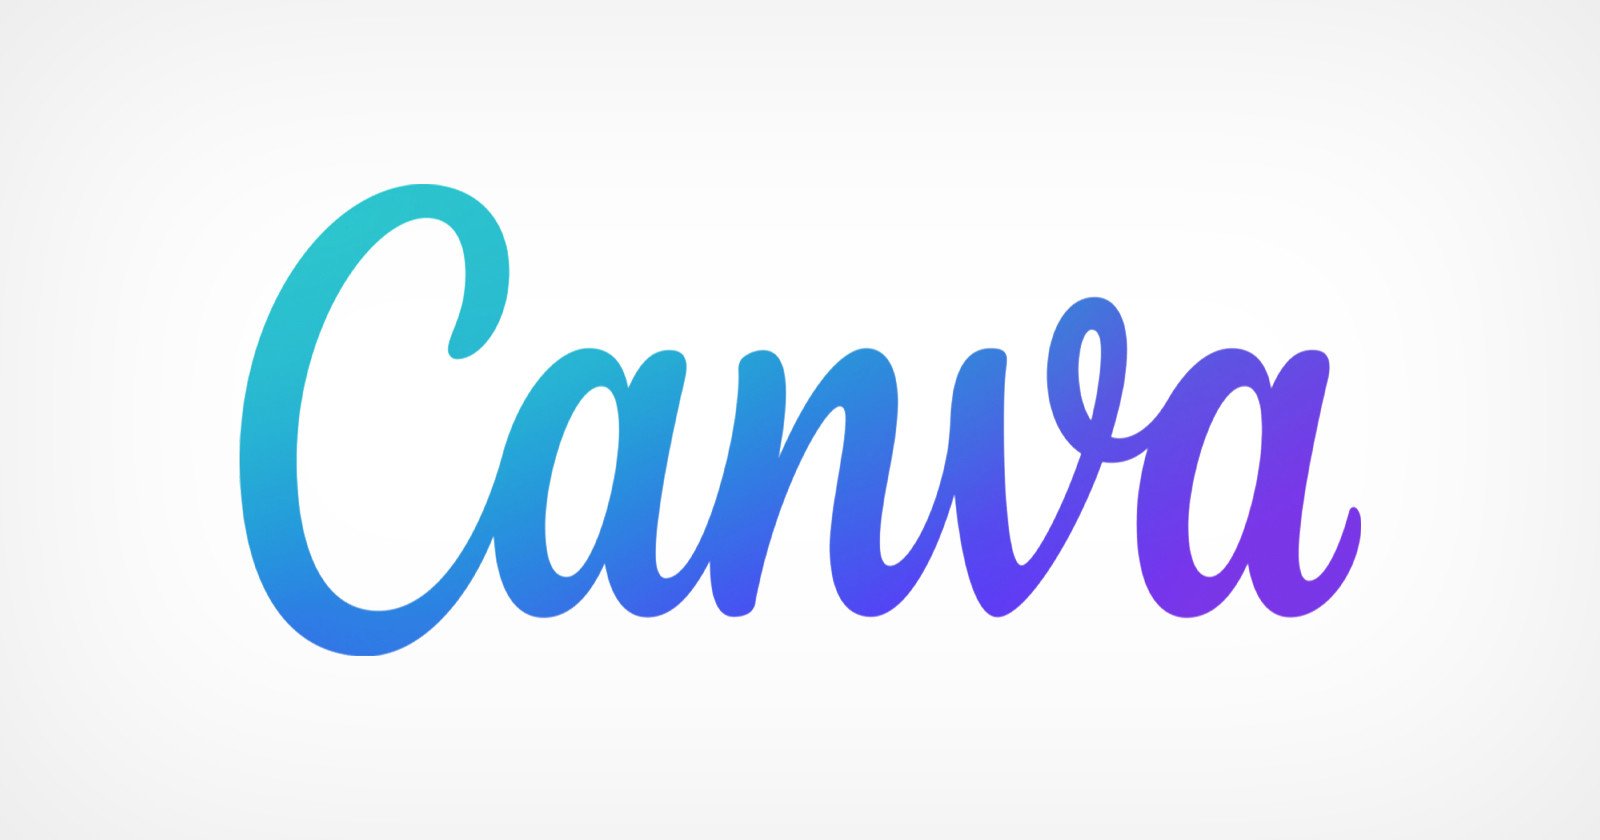  canva passes 100 million monthly active users nearly 